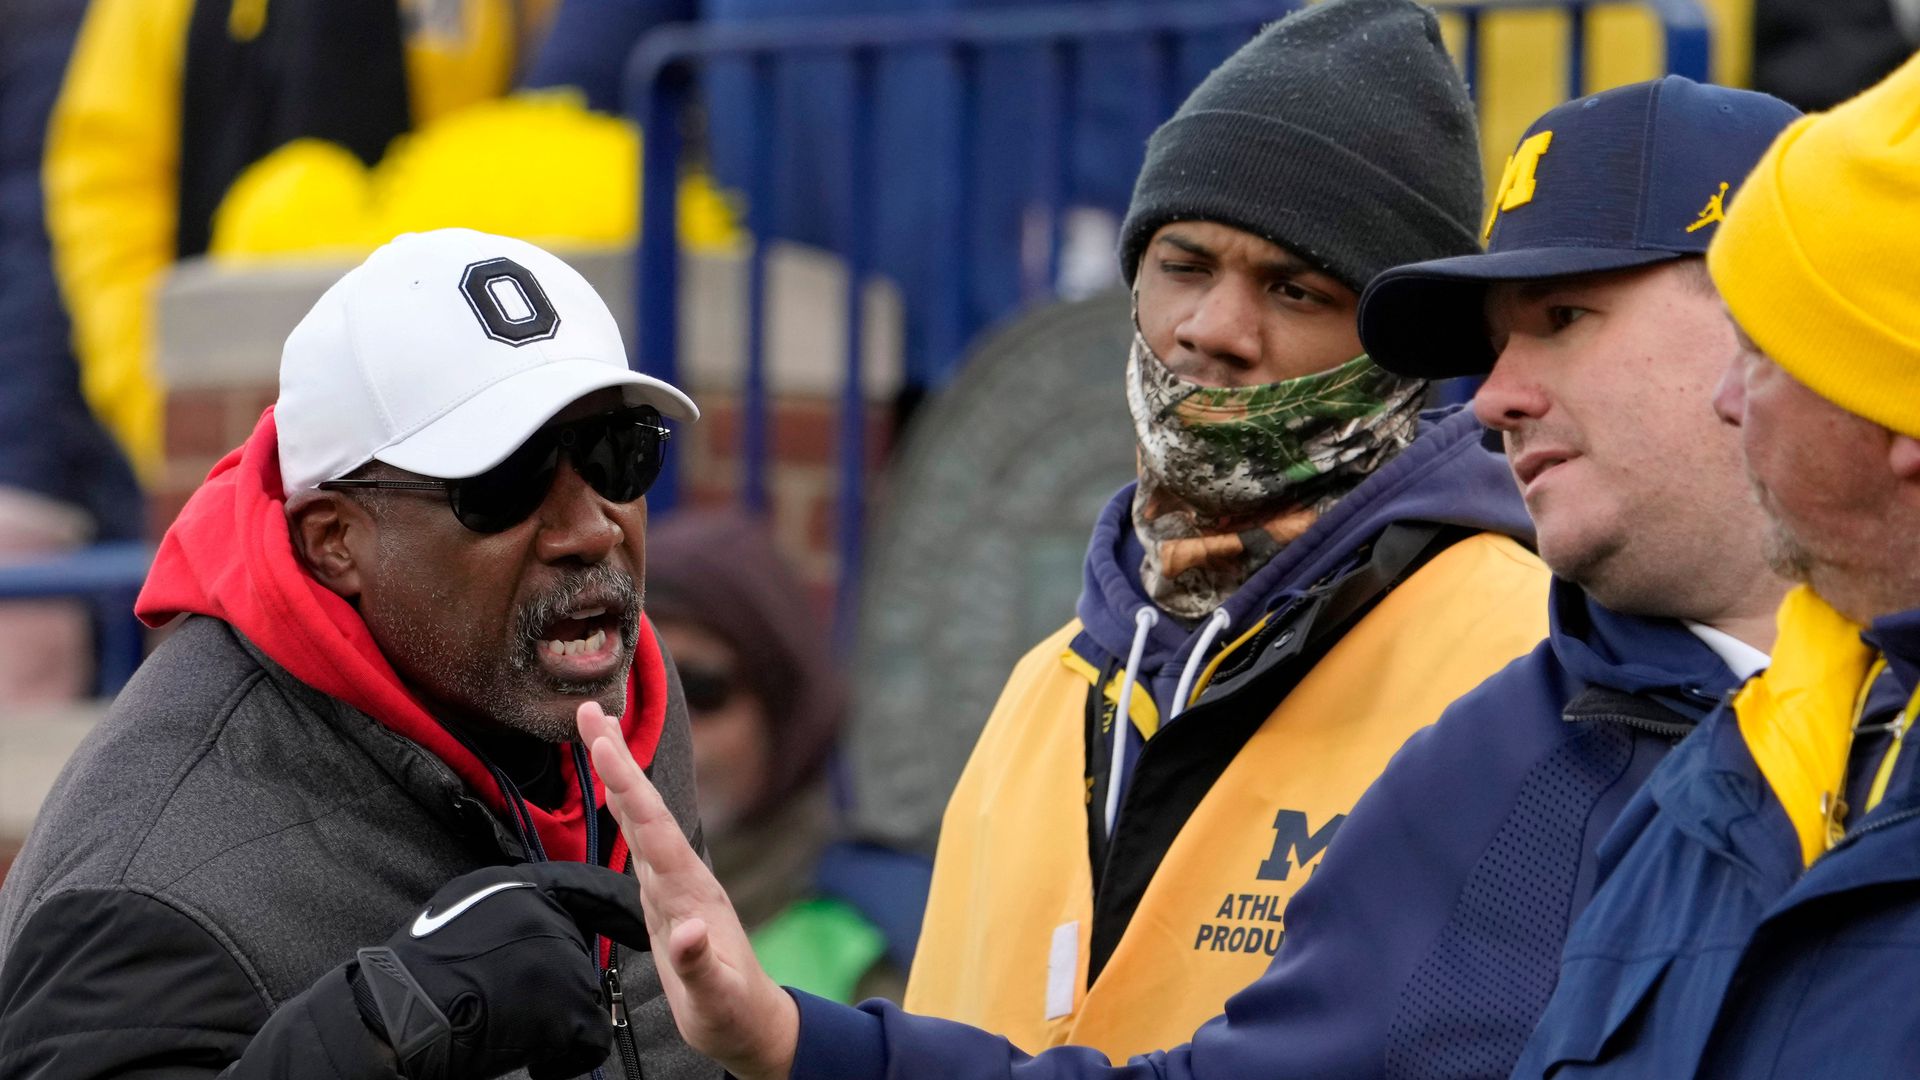 gene smith wanting michigan wins vs. ohio state to receive an asterisk is laughable